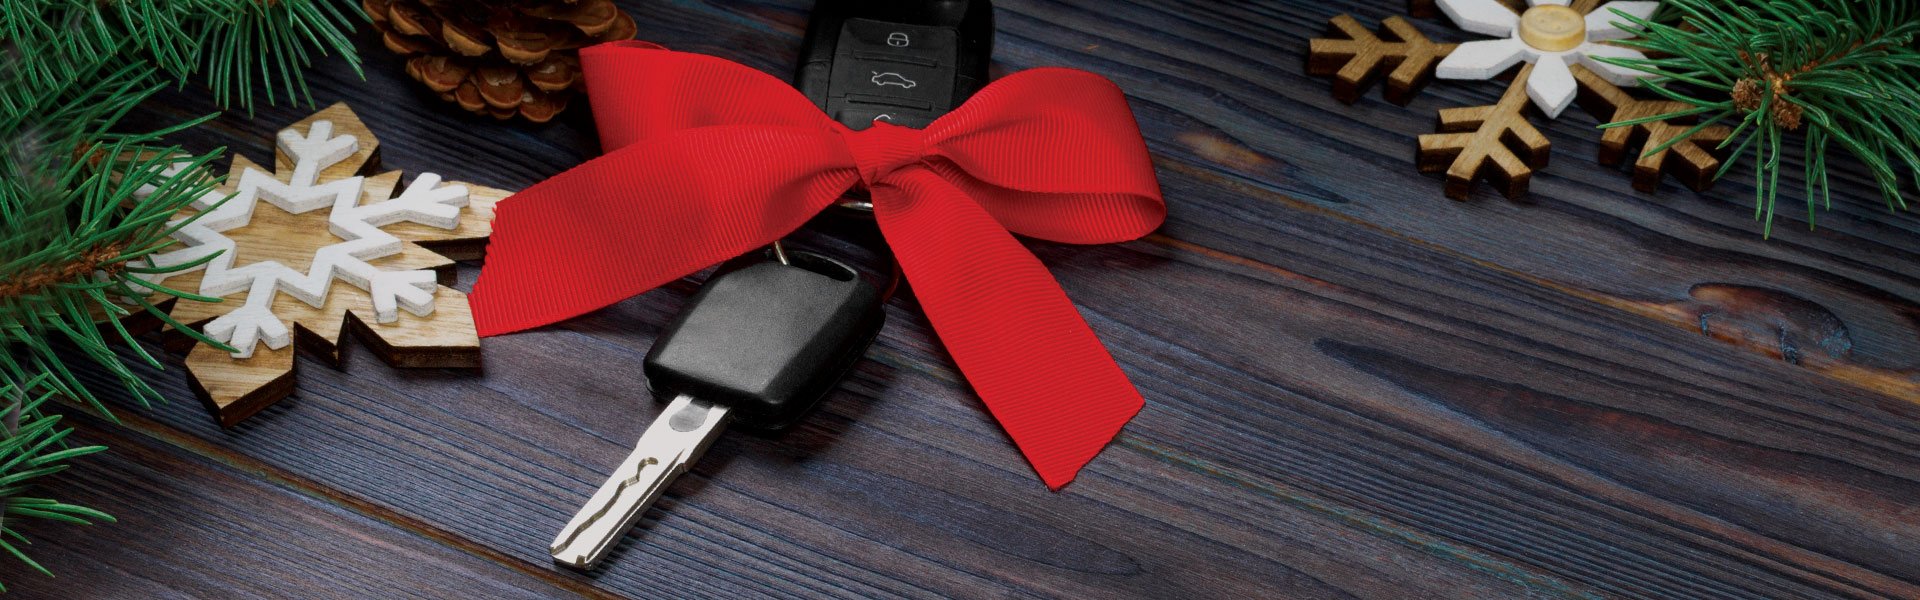 Car key with a bow on it